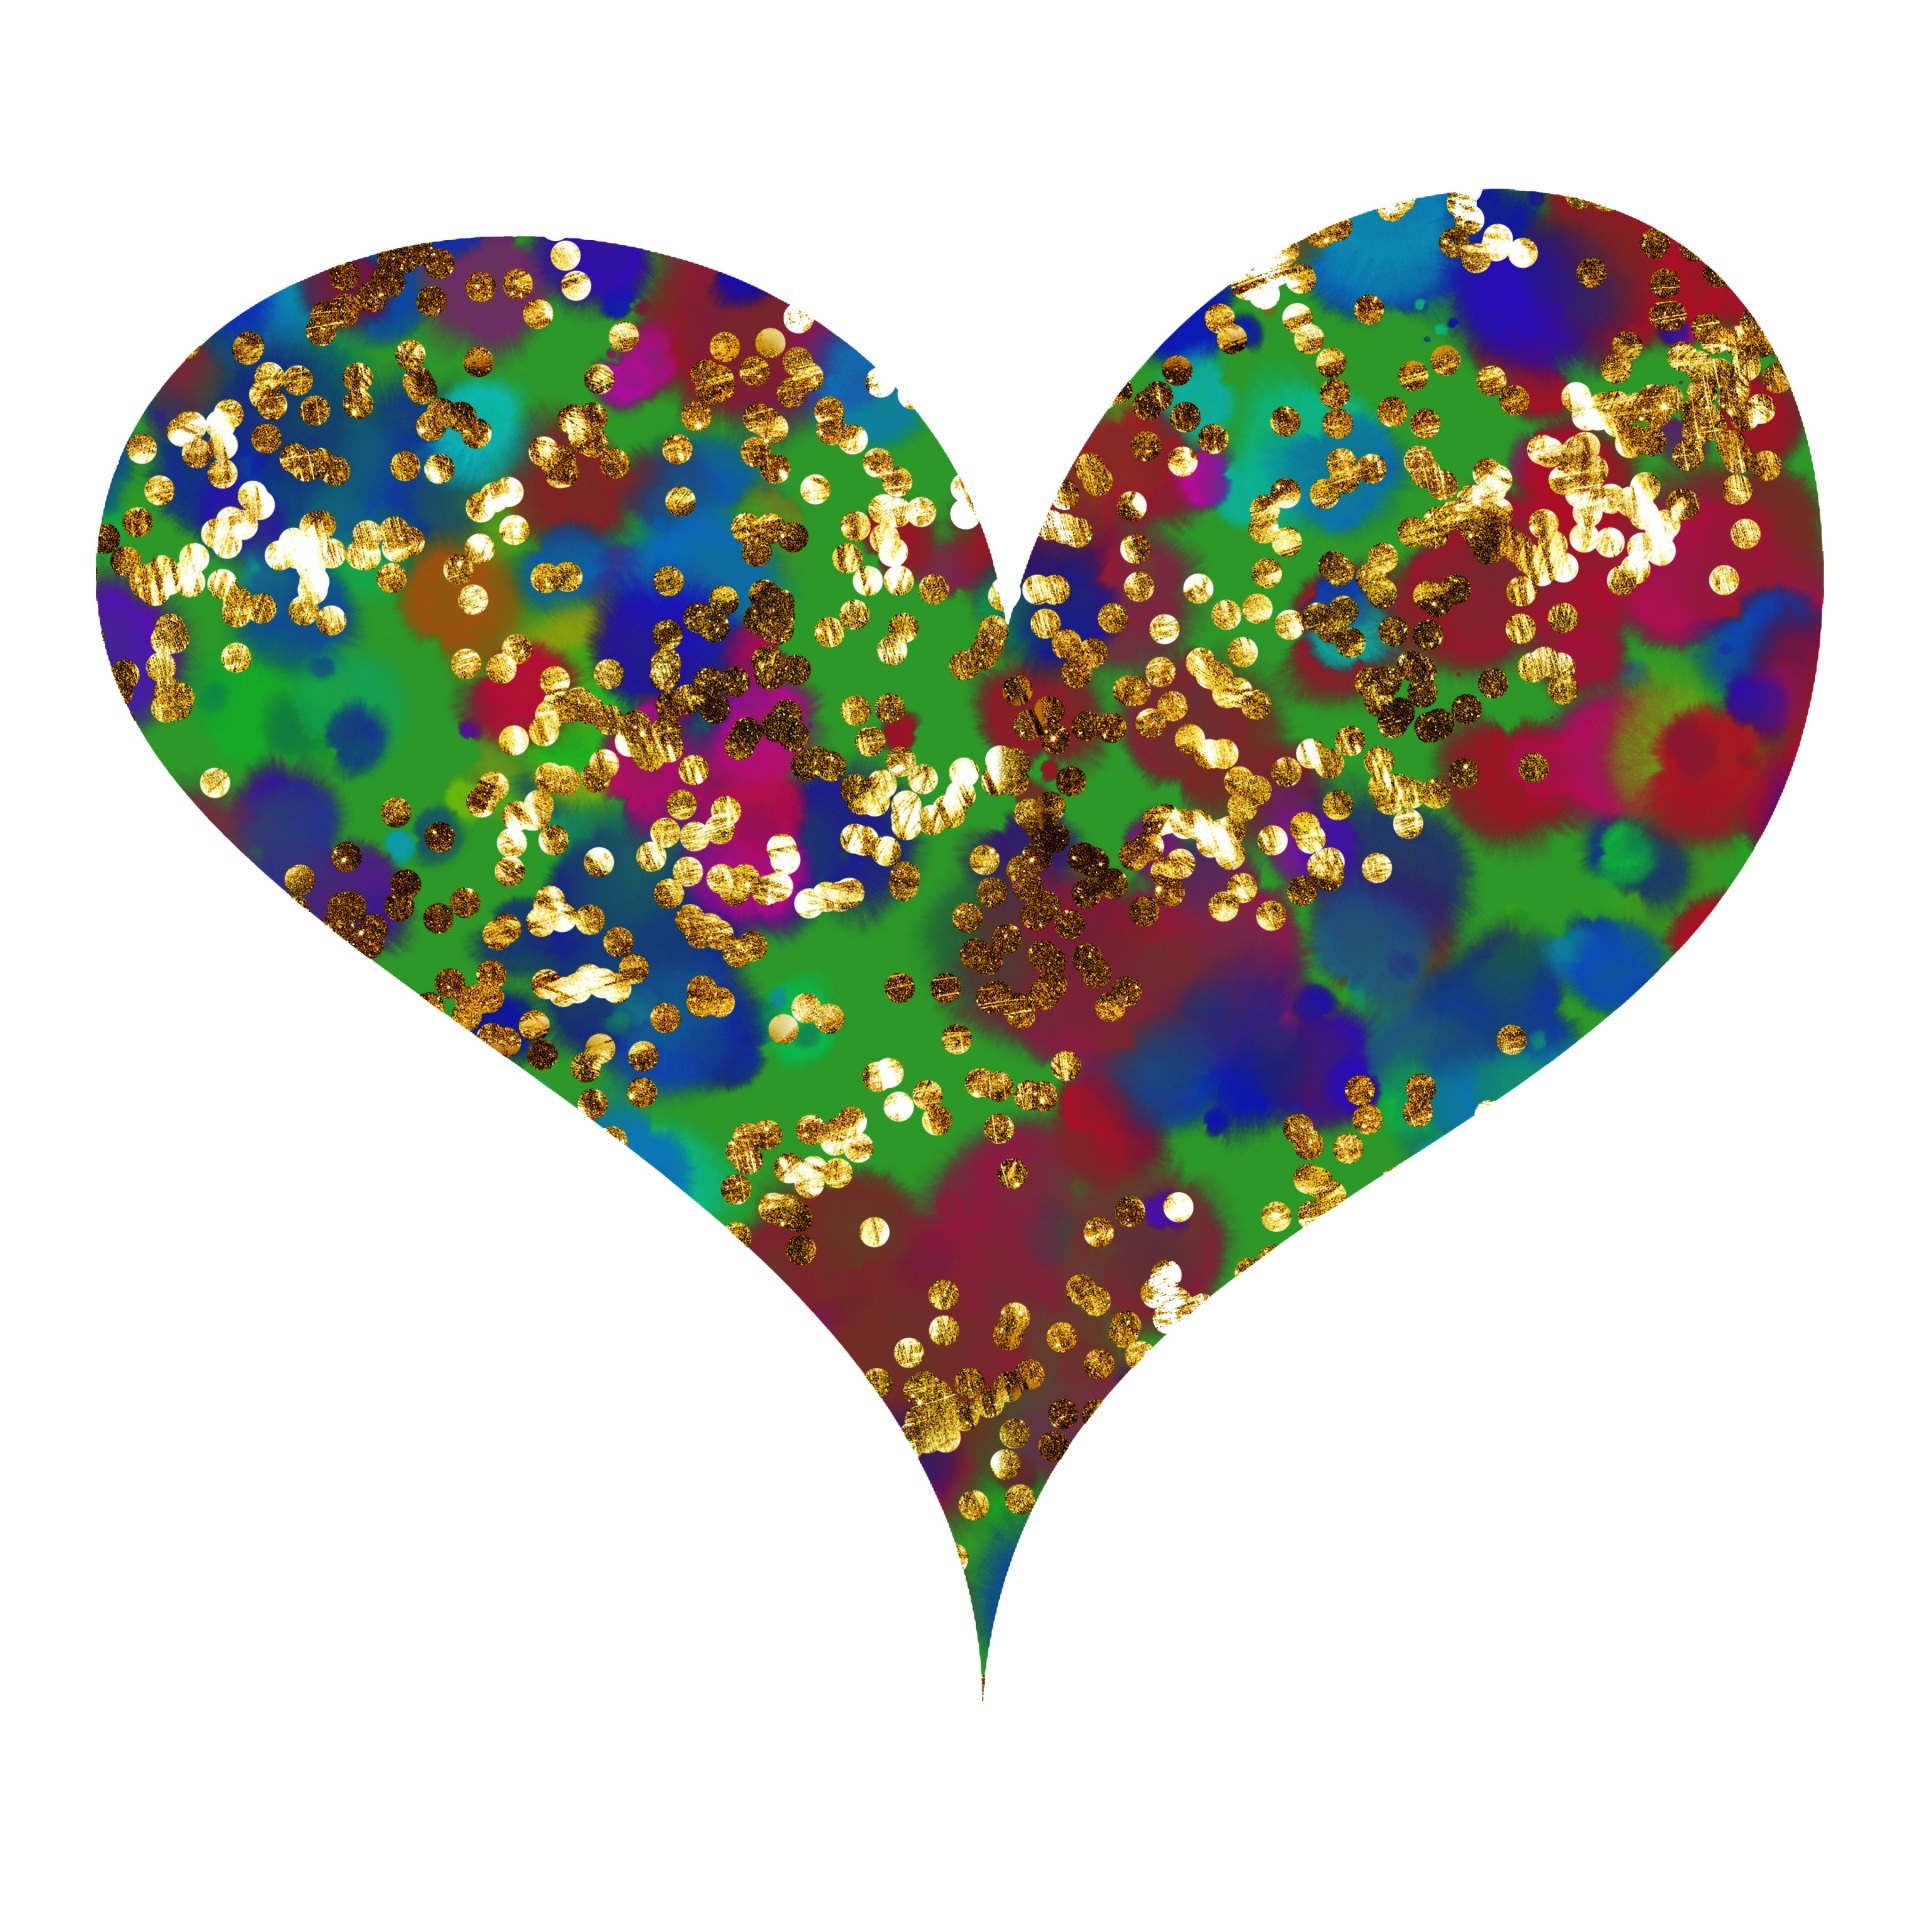 blue, green and burgundy heart with gold glitter overlay on a white background